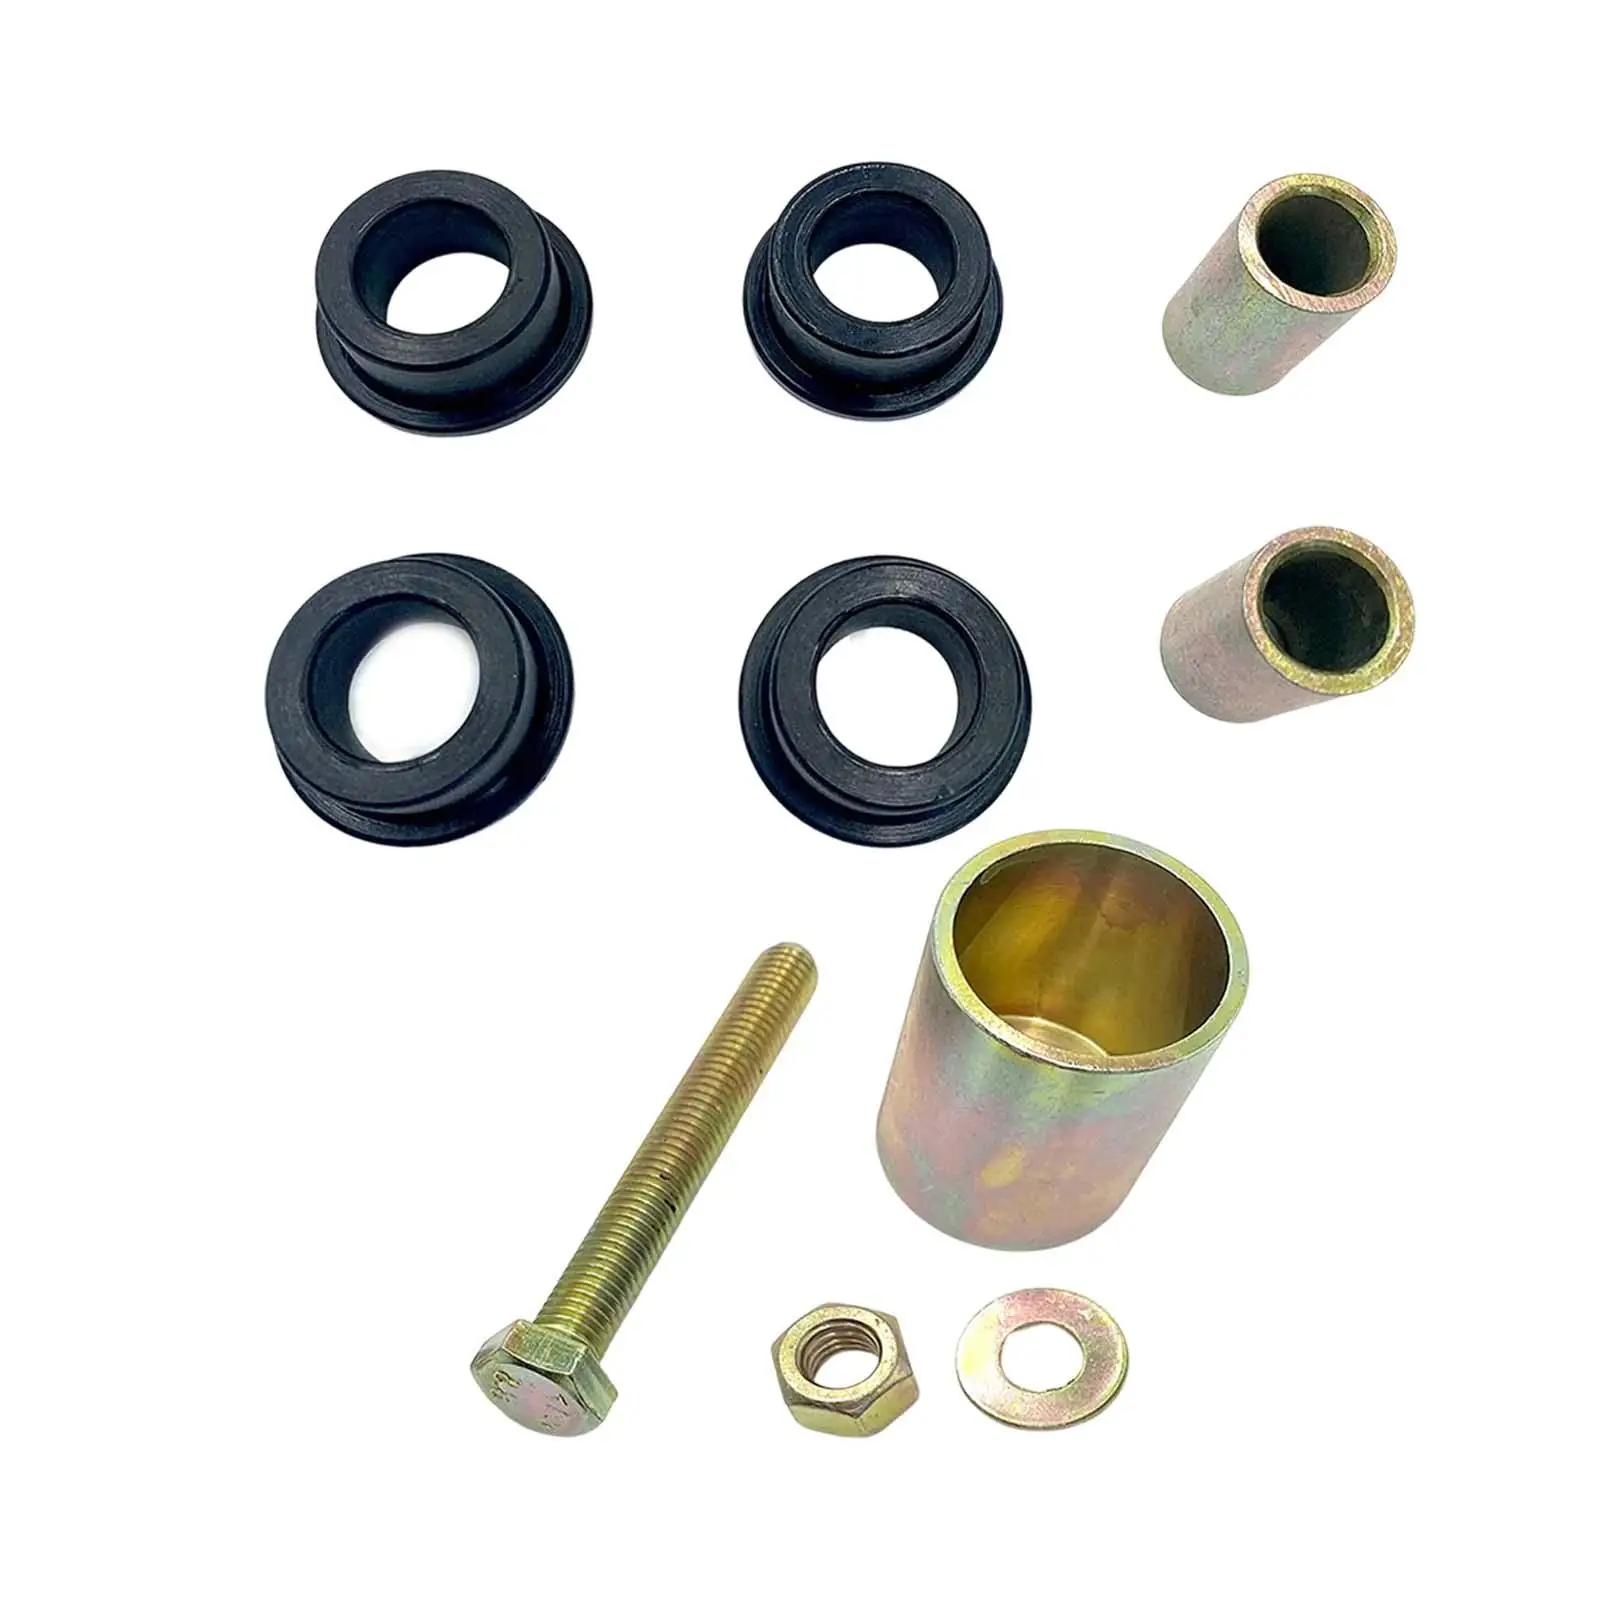 Steering Rack Bushing Psp-Sus-562 for WRX 2005-2014 Car Accessory